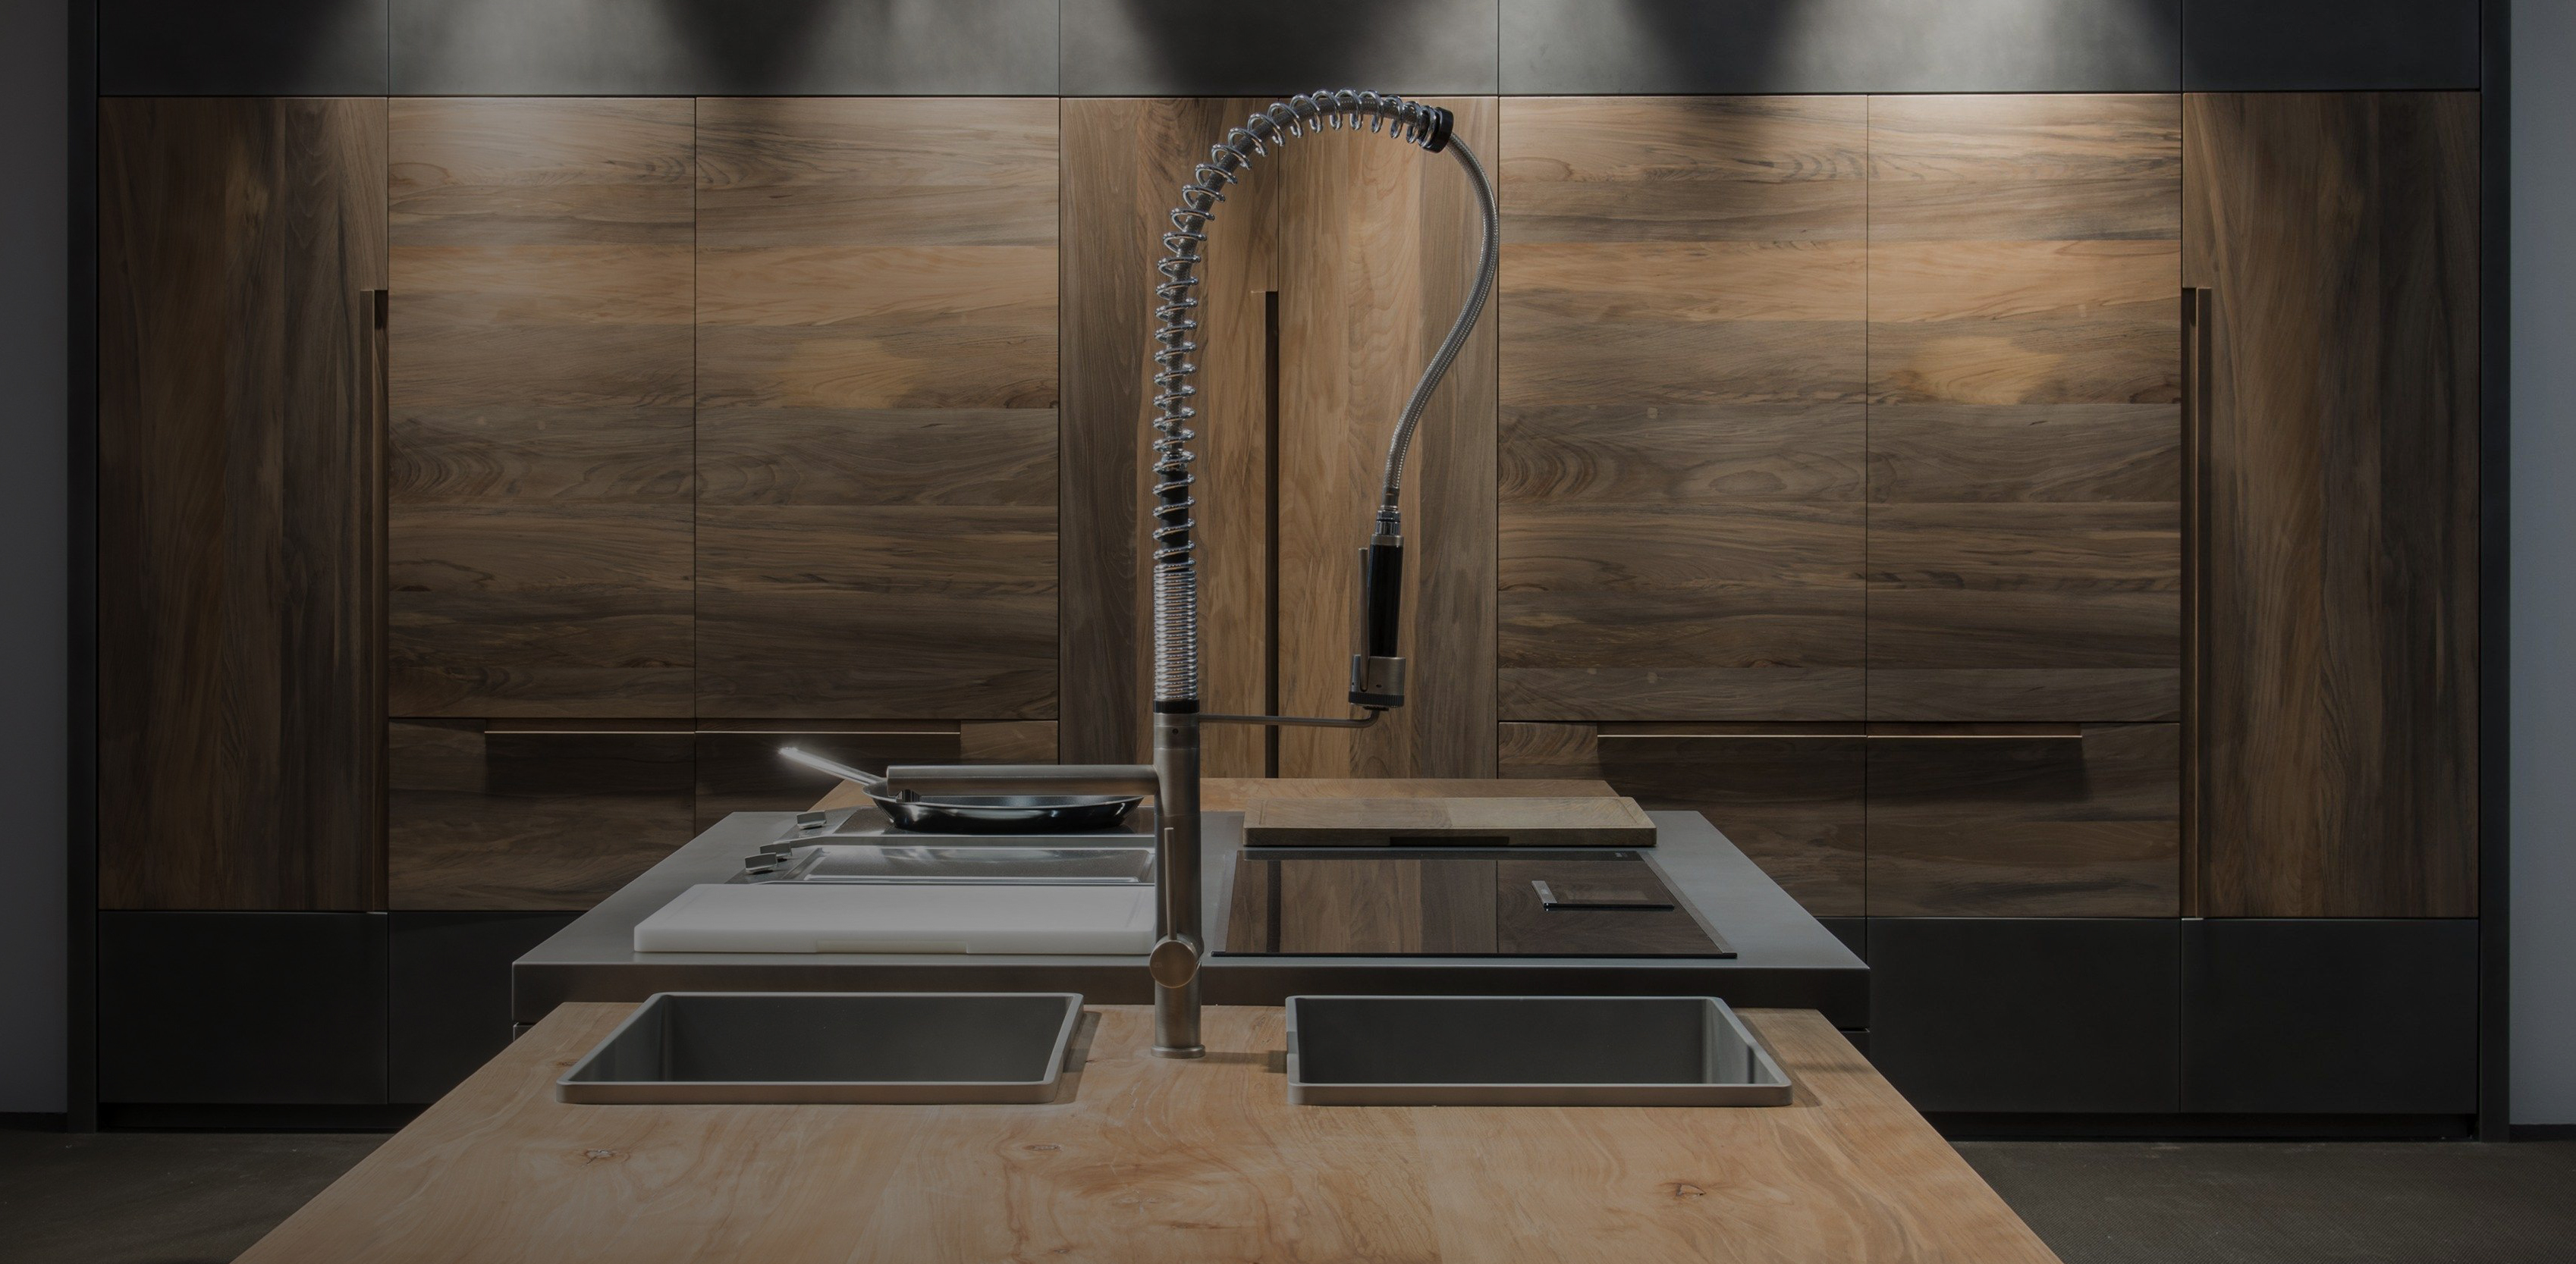 Modern luxury kitchens: the most beautiful in the world - RiFRA